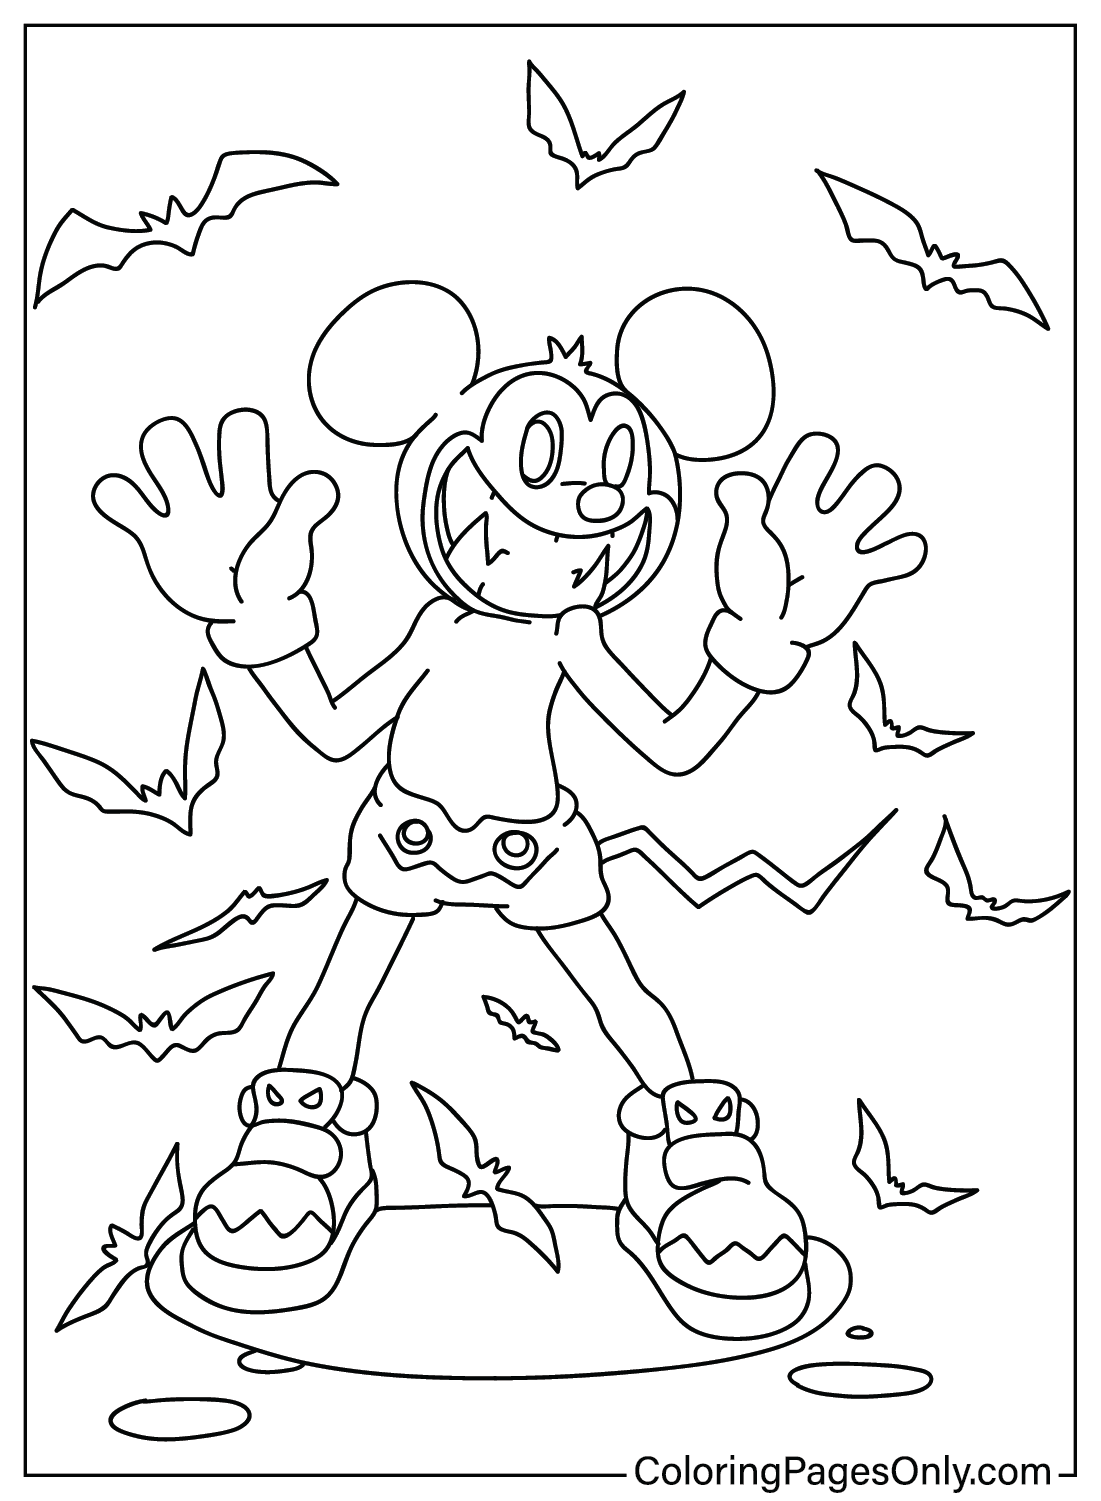 Free Printable Mickey Halloween Coloring Page from Mickey Halloween